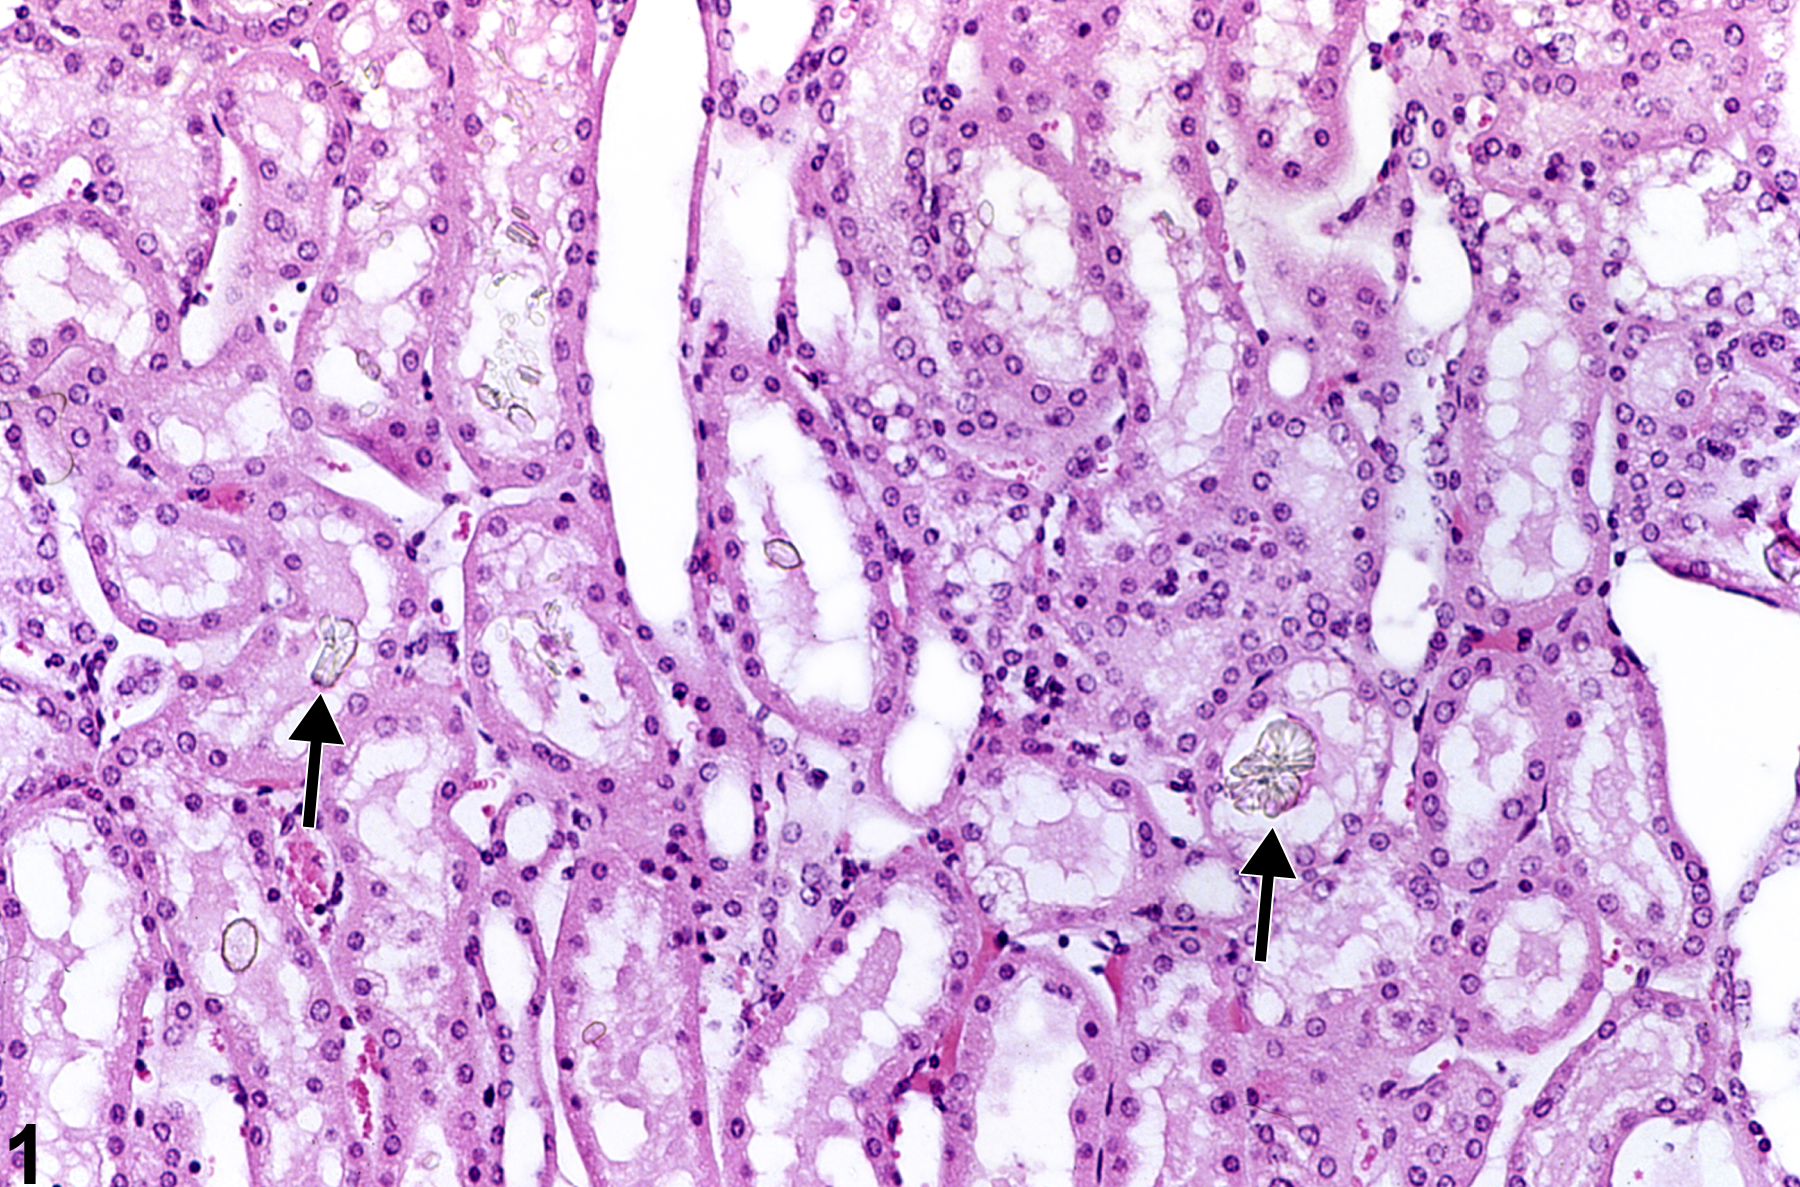 Image of crystal in the kidney from a male B6C3F1 mouse in a chronic study